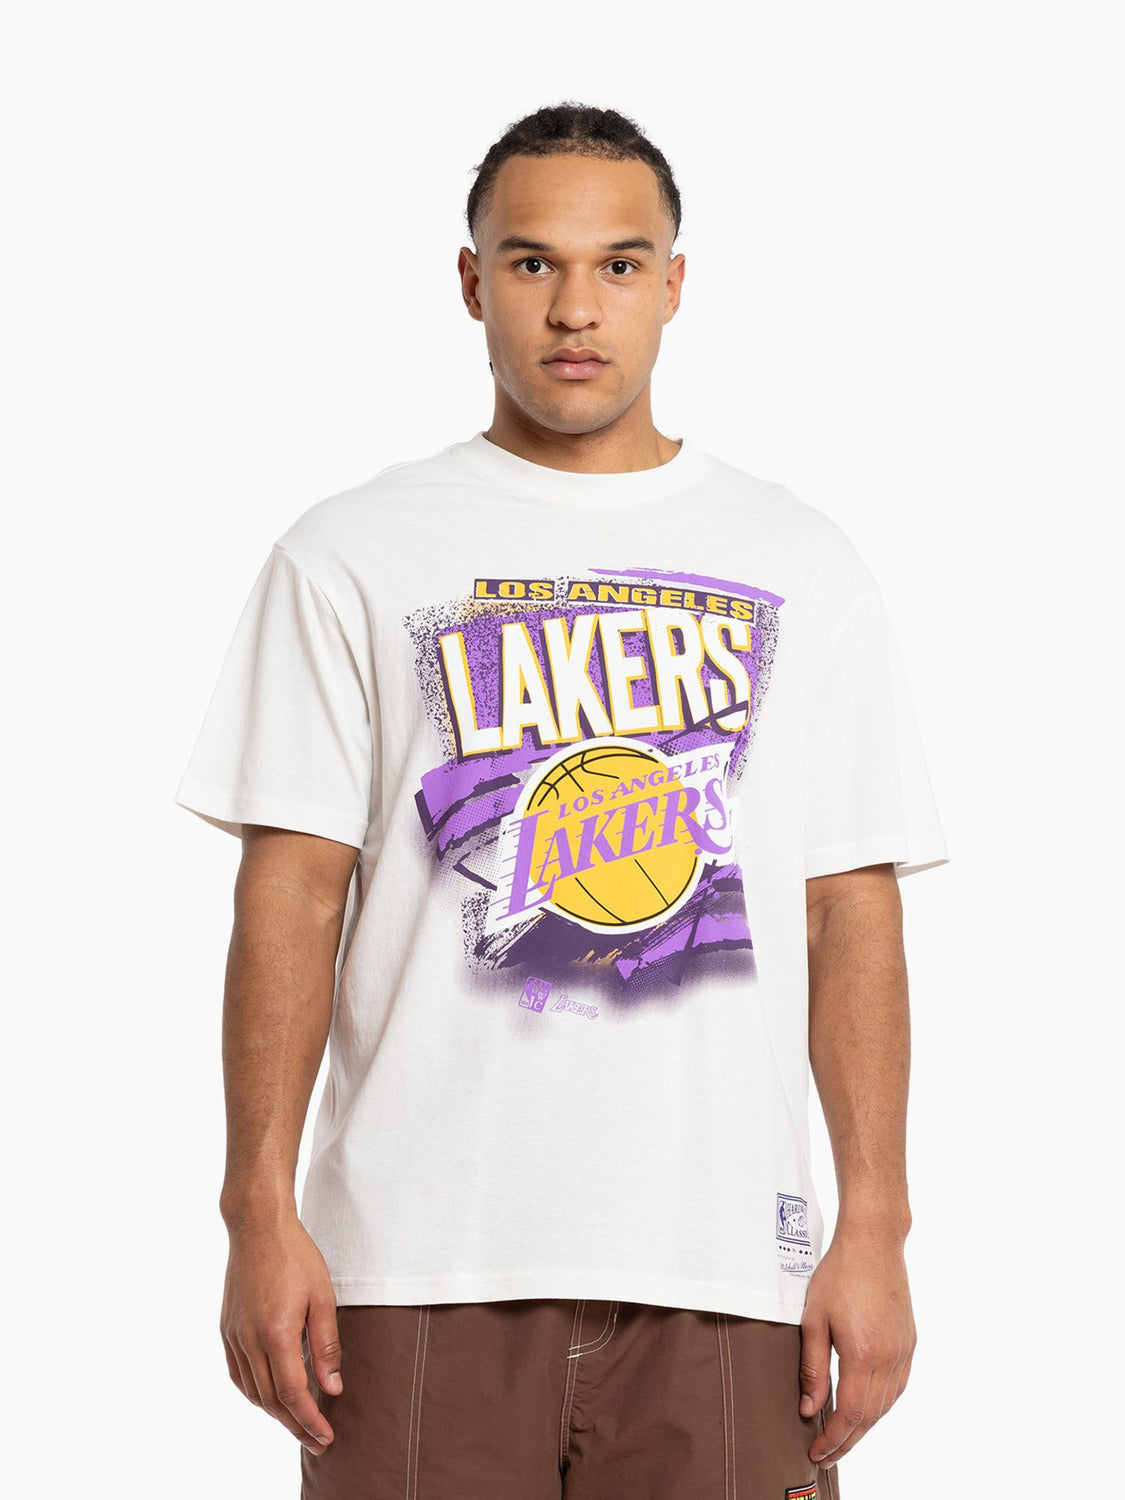 L.A Lakers Abstract Tee | Mitchell & Ness